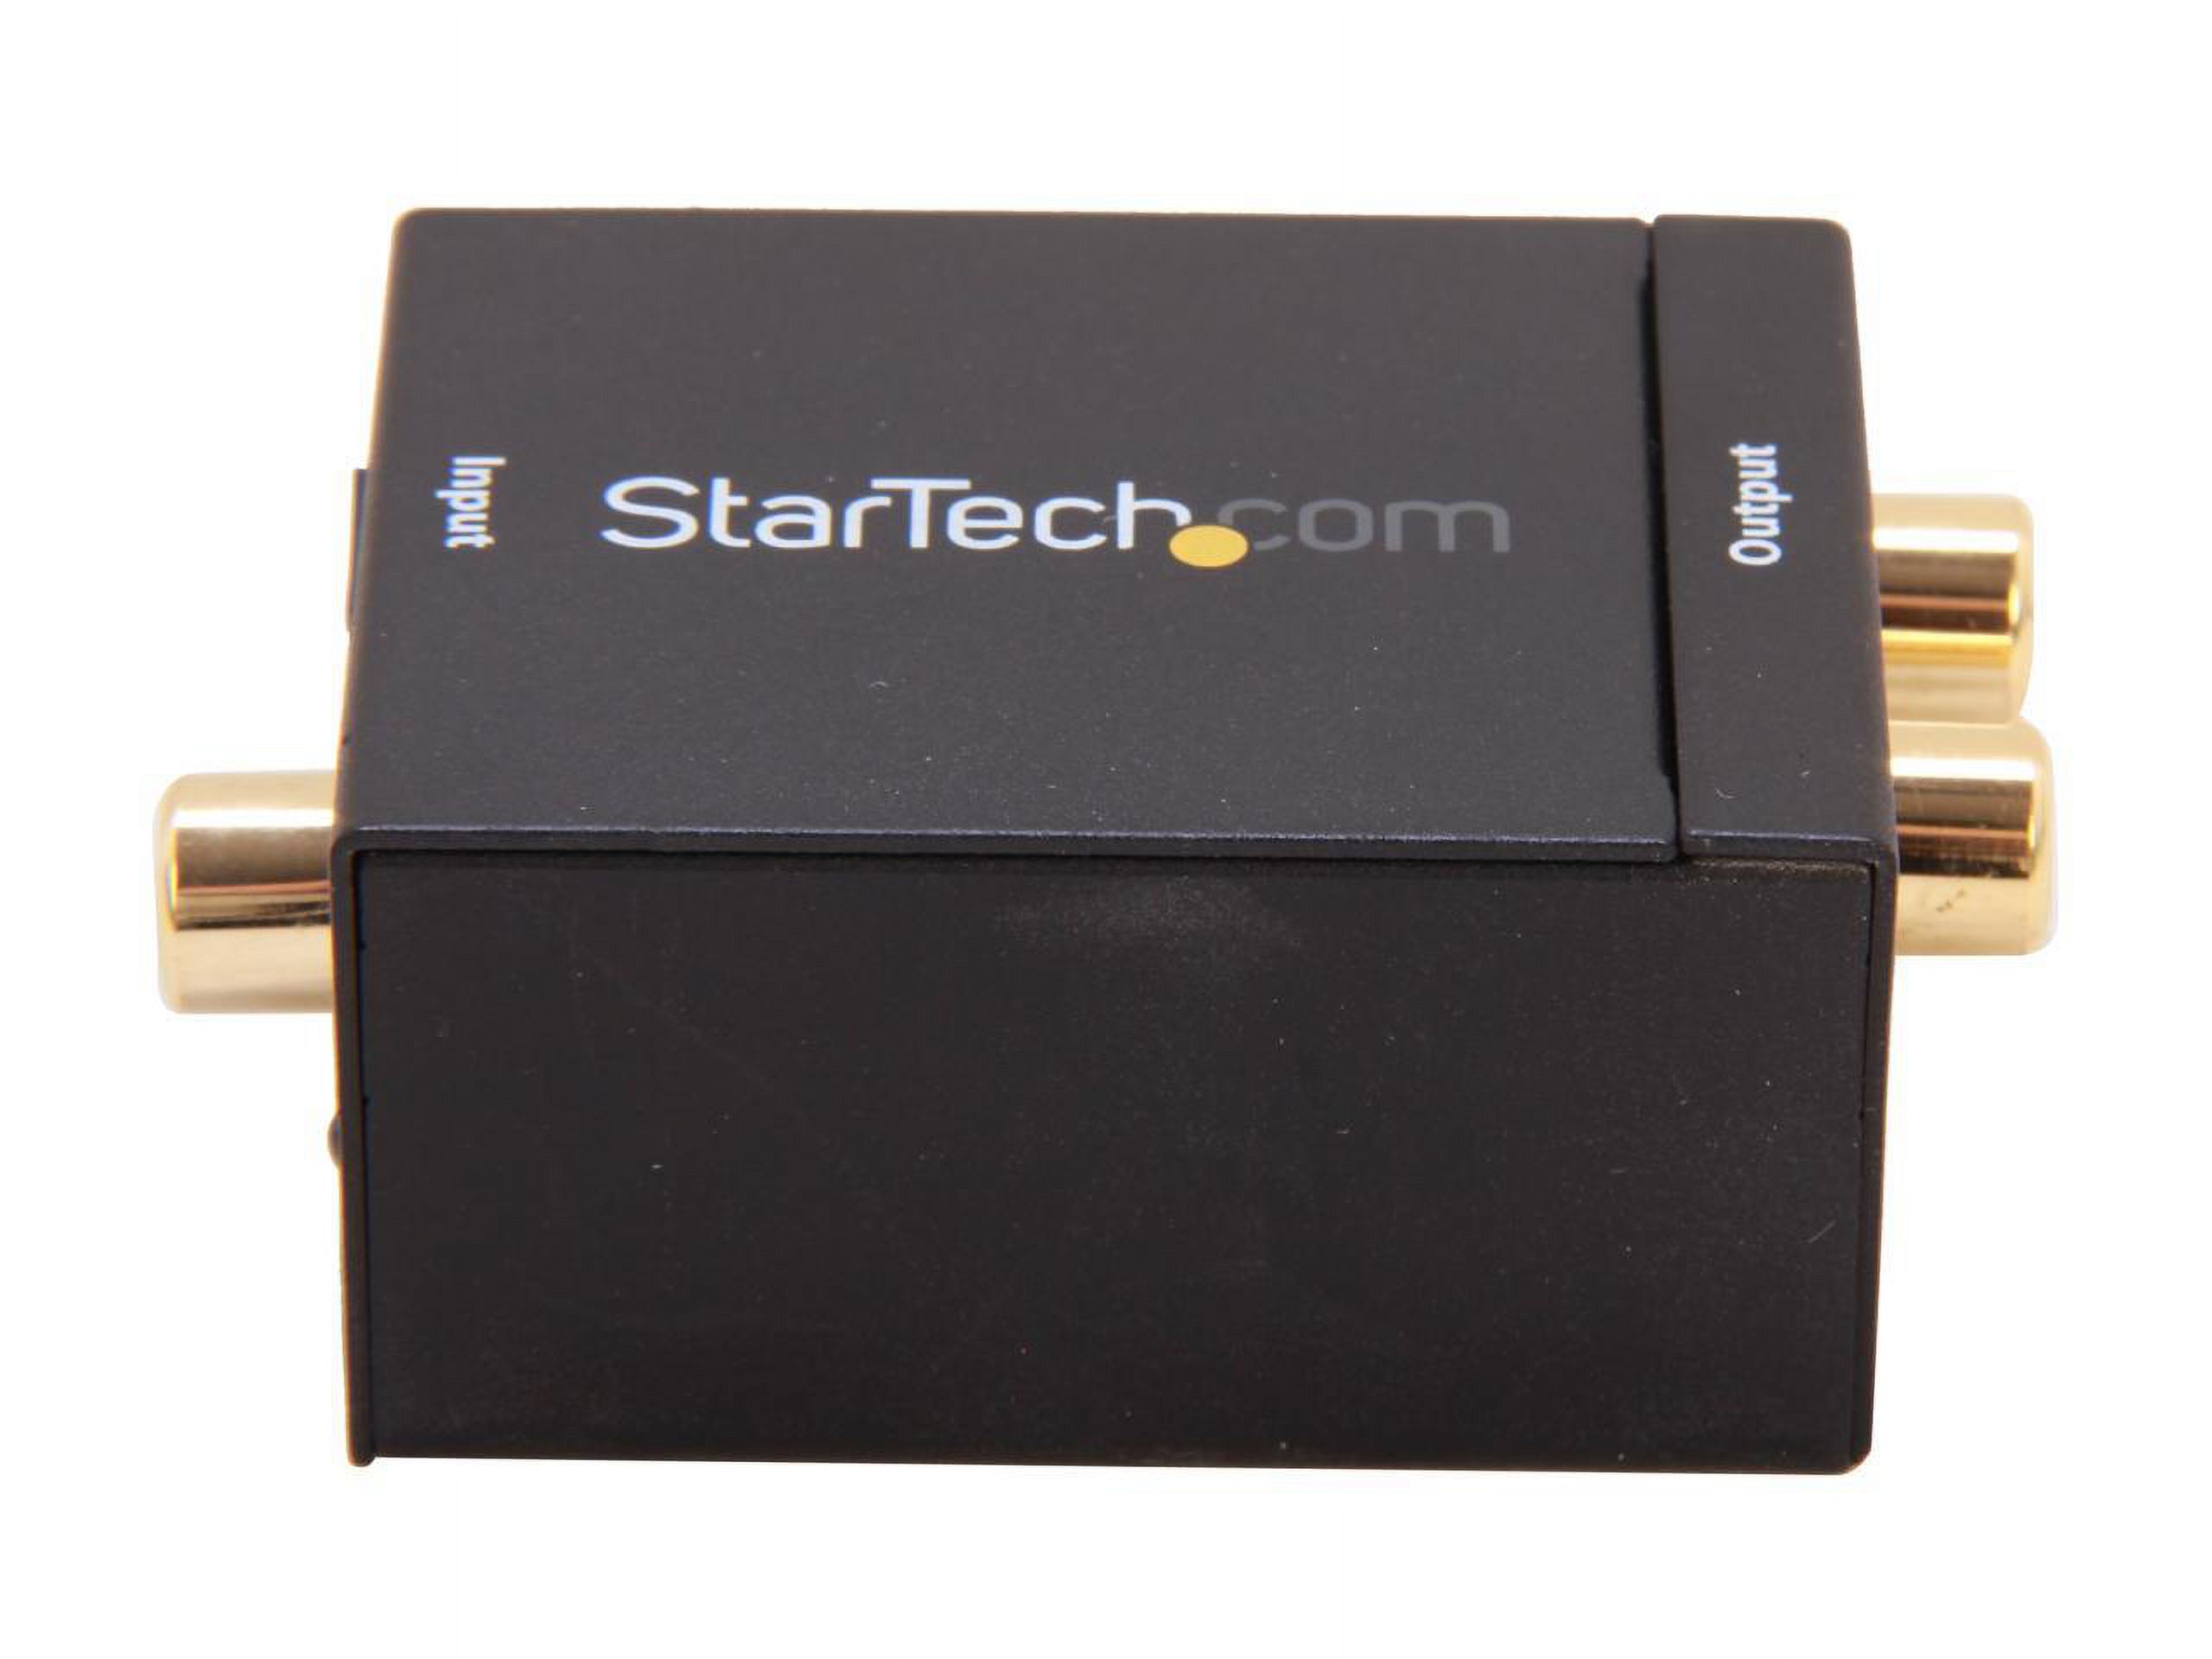 StarTech.com SPDIF2AA SPDIF Digital Coaxial or Toslink to Stereo RCA Audio Converter - image 2 of 5